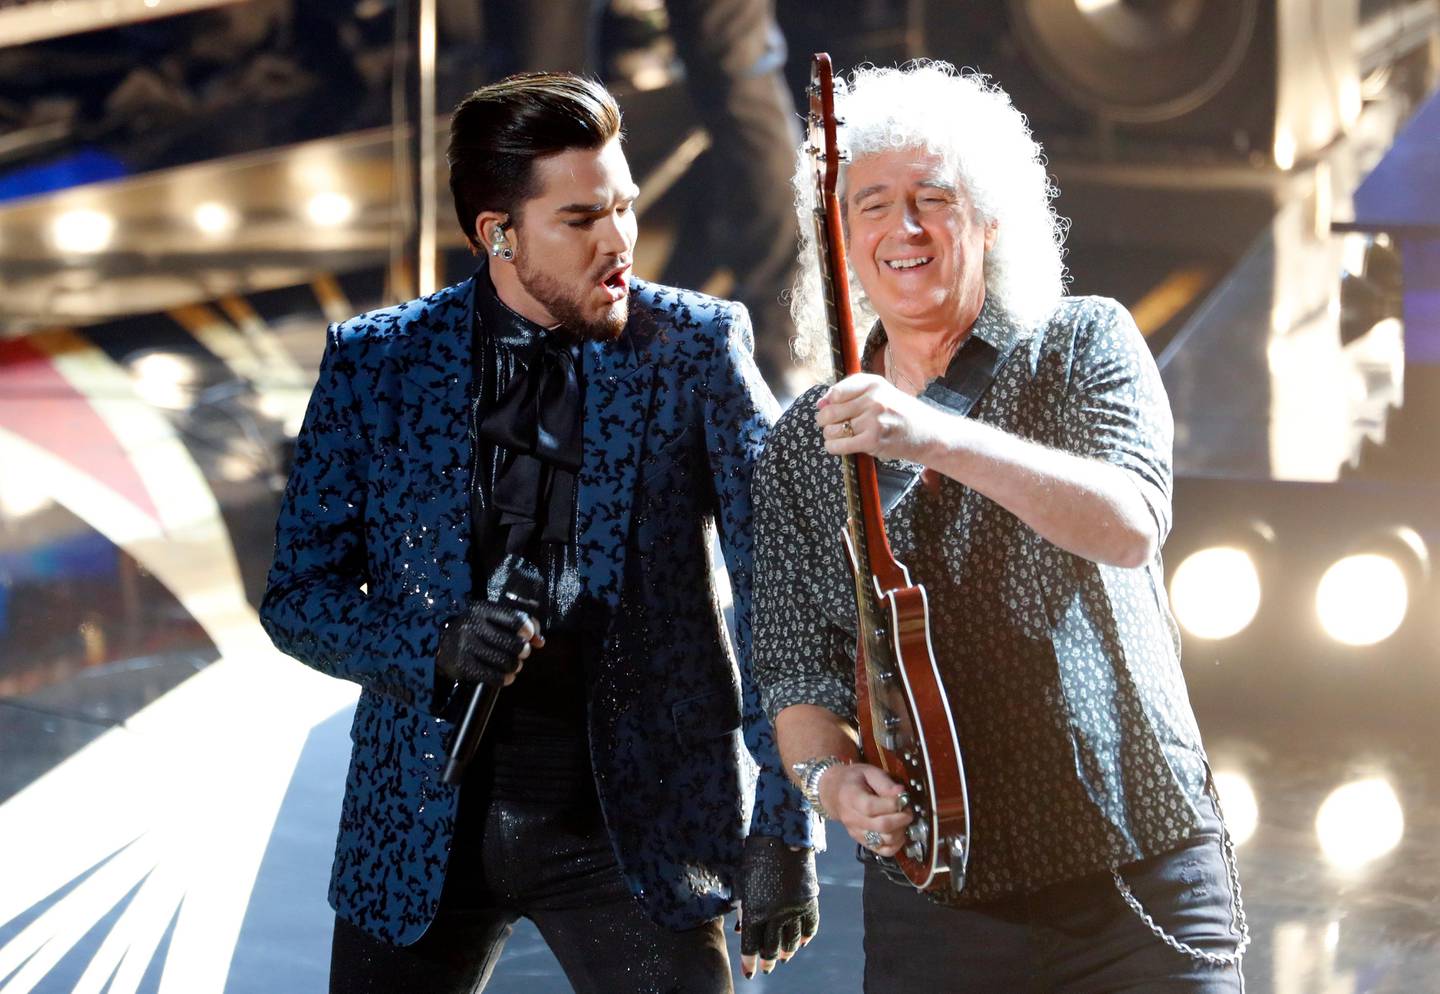 91st Academy Awards - Oscars Show - Hollywood, Los Angeles, California, U.S., February 24, 2019. Adam Lambert (L) performs with Brian May of Queen. REUTERS/Mike Blake